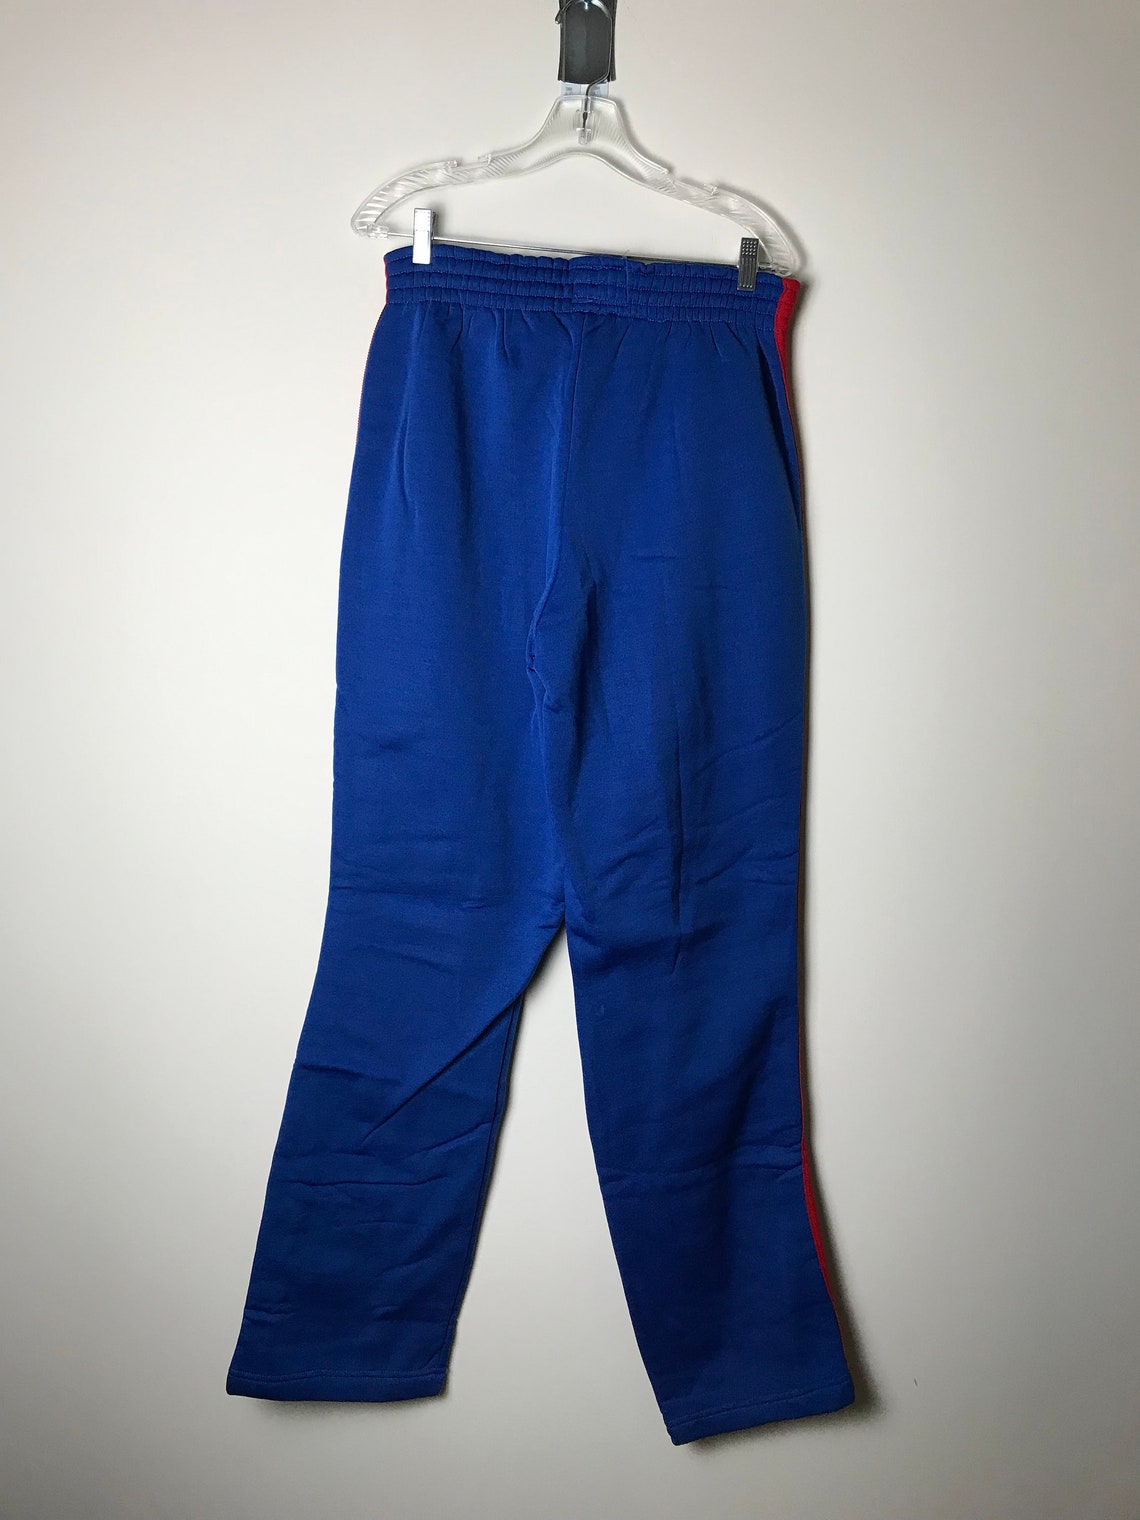 80s Champion Sweatpants in Royal Blue and Red XL | Etsy